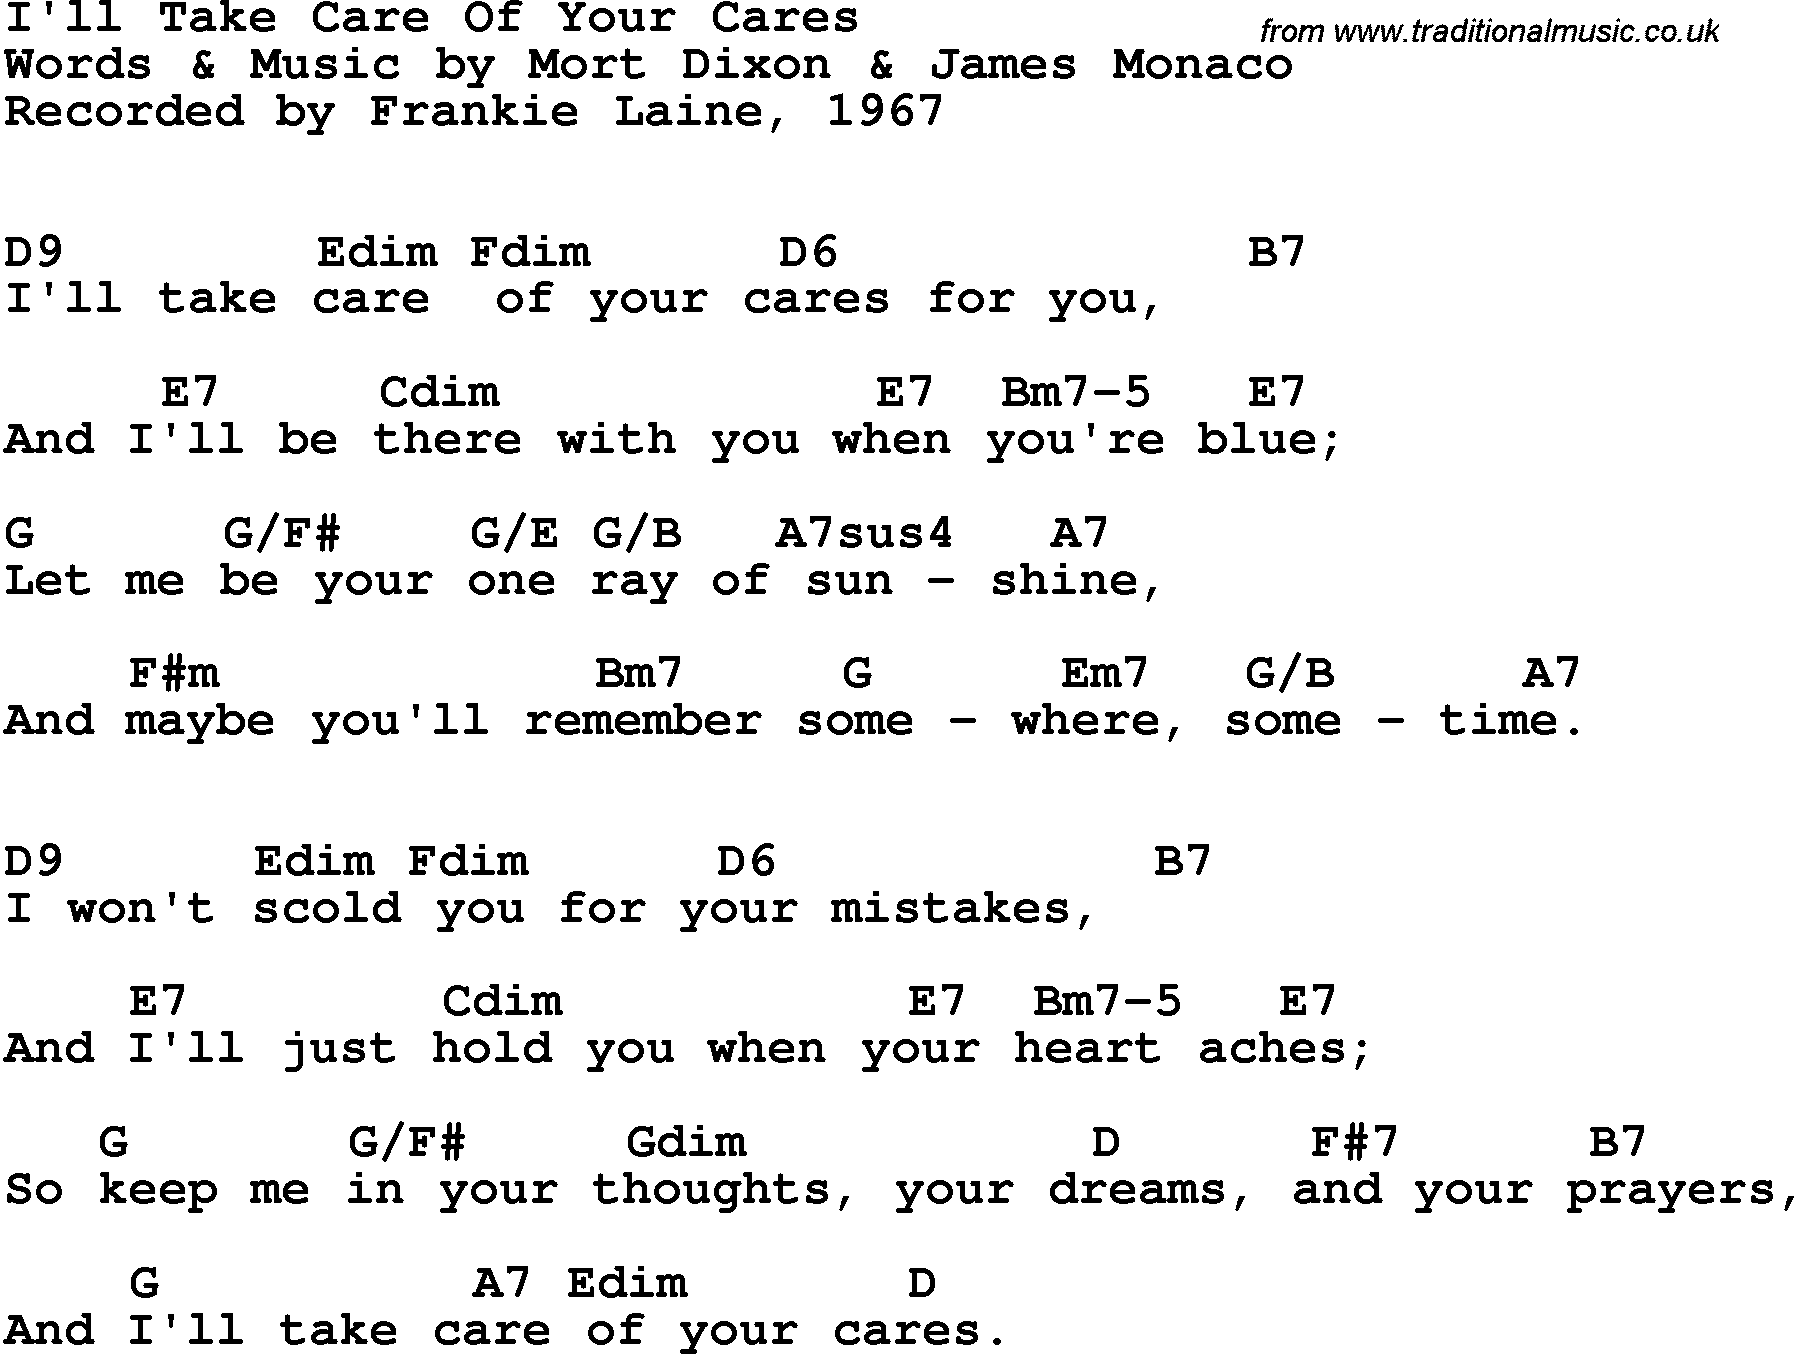 Song Lyrics with guitar chords for I'll Take Care Of Your Cares - Frankie Laine, 1967